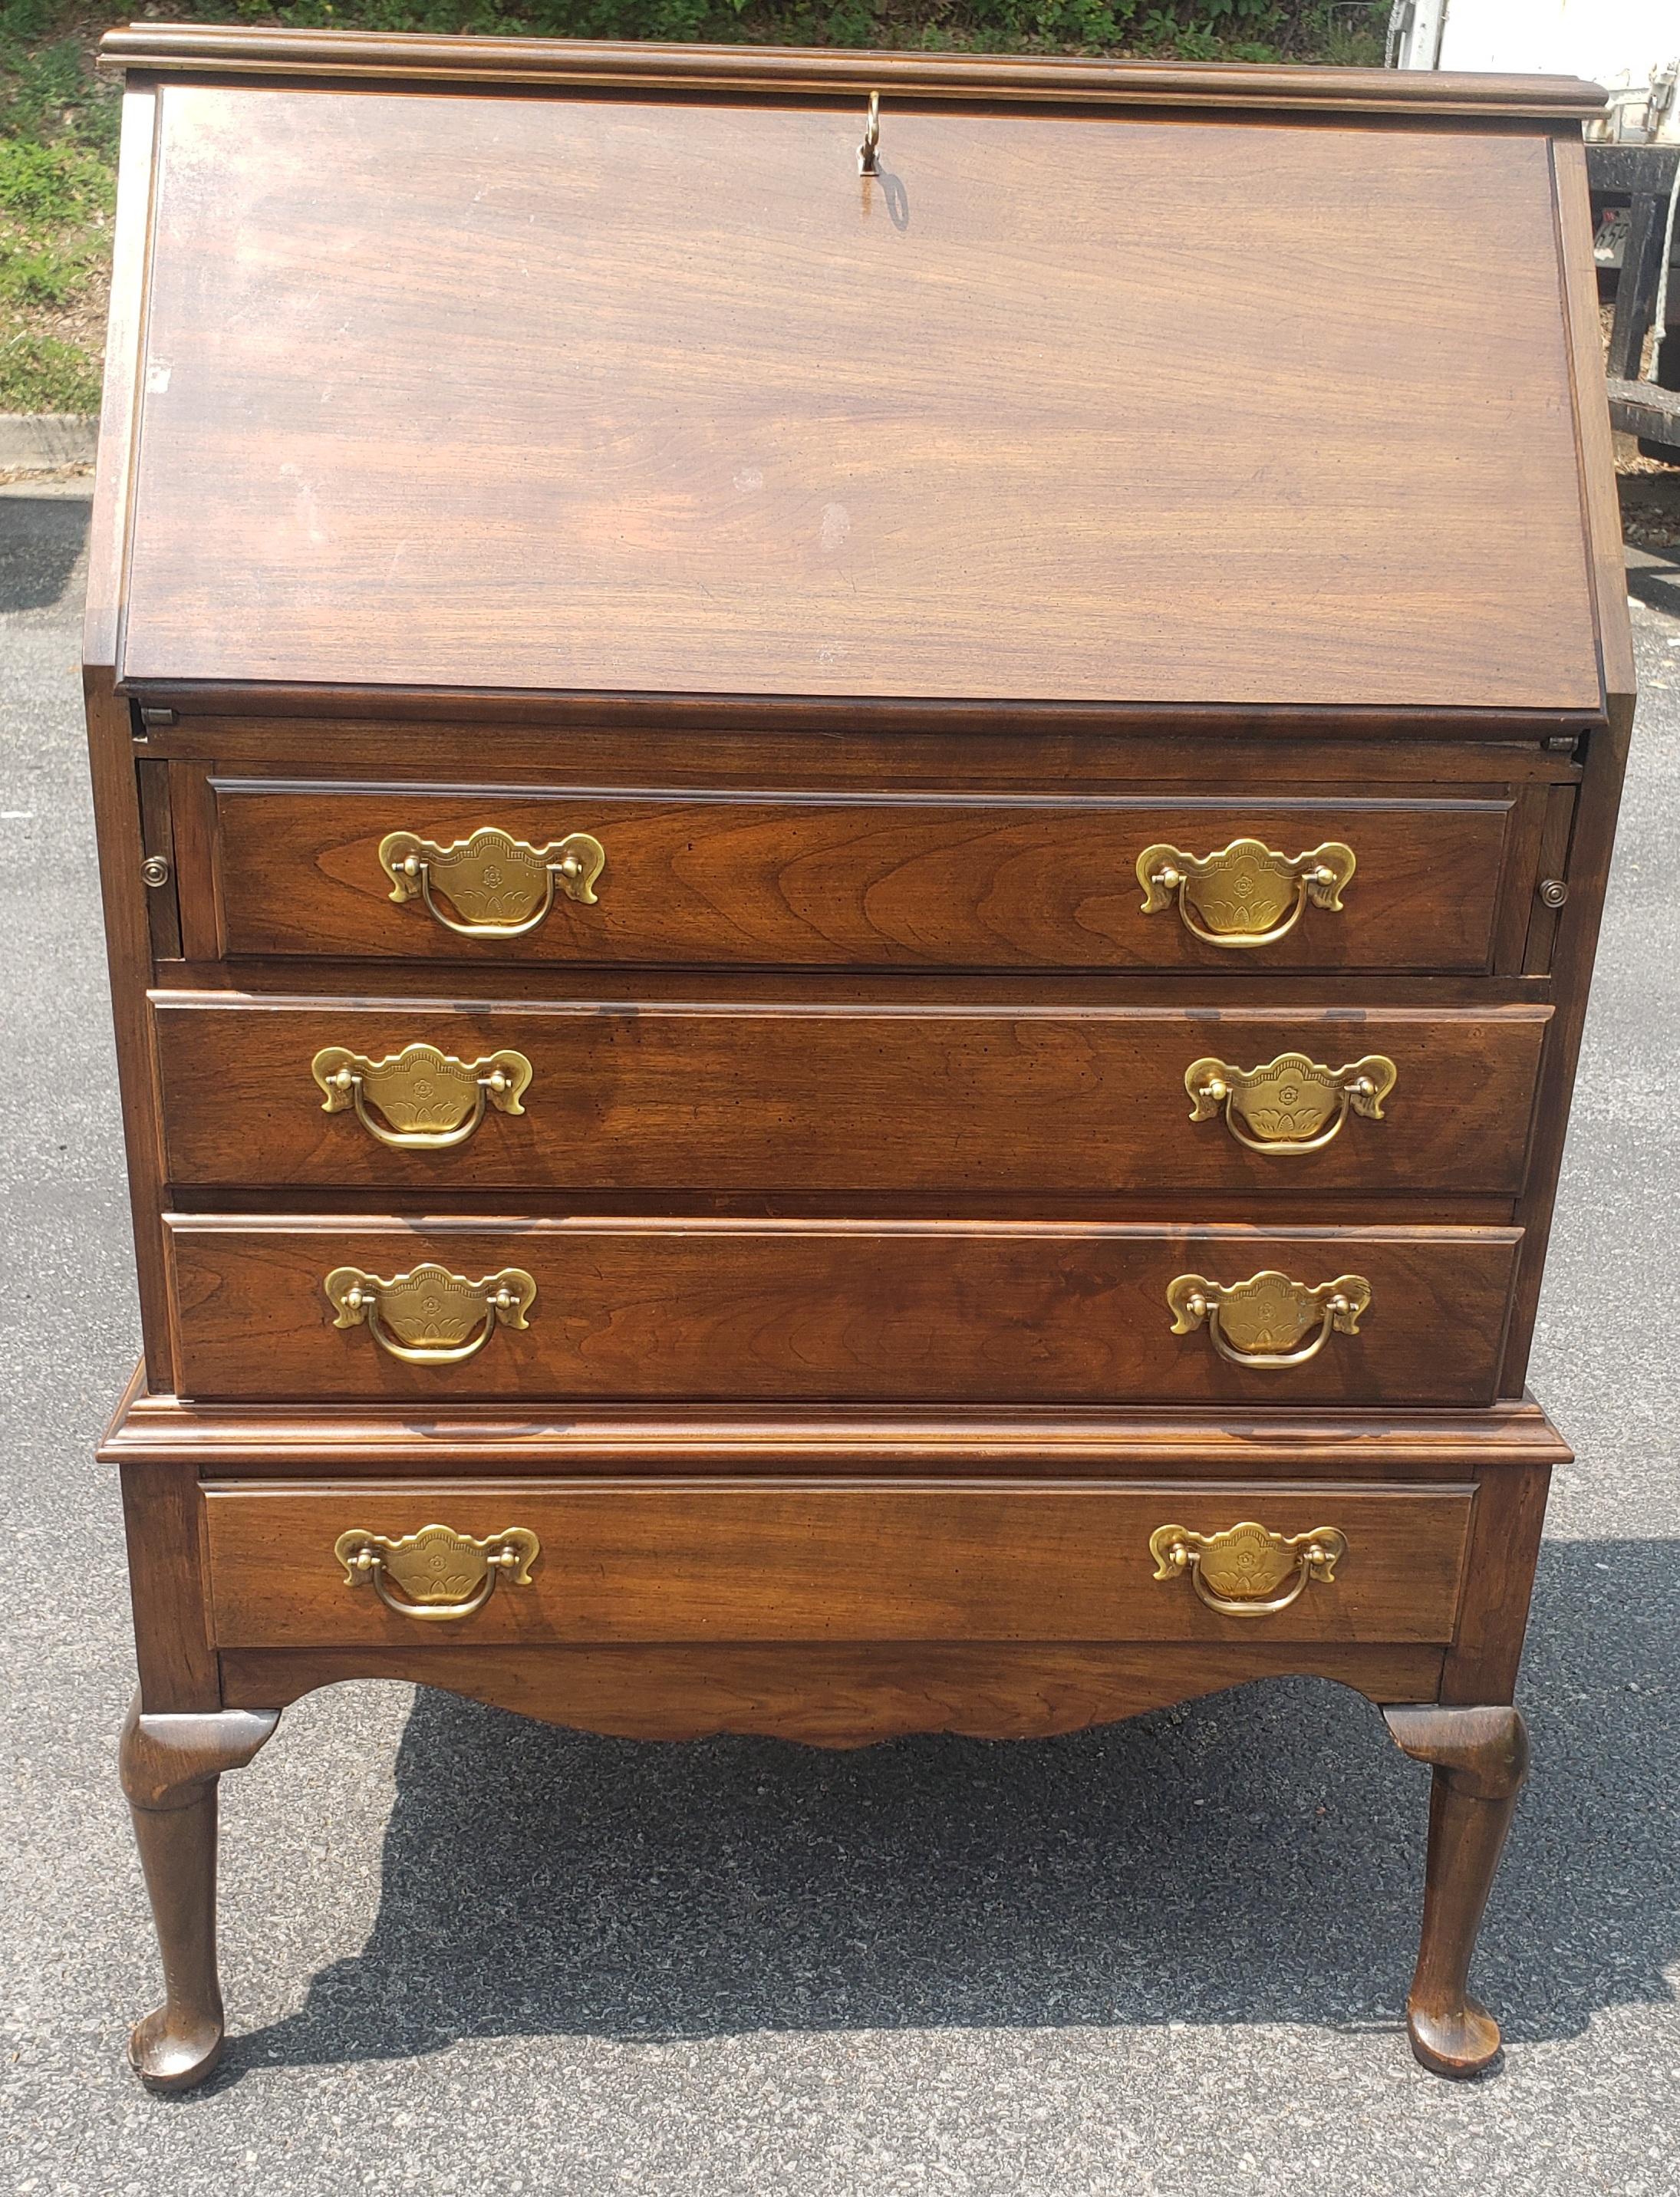 Pennsylvania House Slant Front Cherry Secretary Desk with Lock. Features four fully functional drawers with dovetail construction and Chippendale styles drawer pulls. Functuonal lock with key.. Desk opens with knee clearance of 28.5